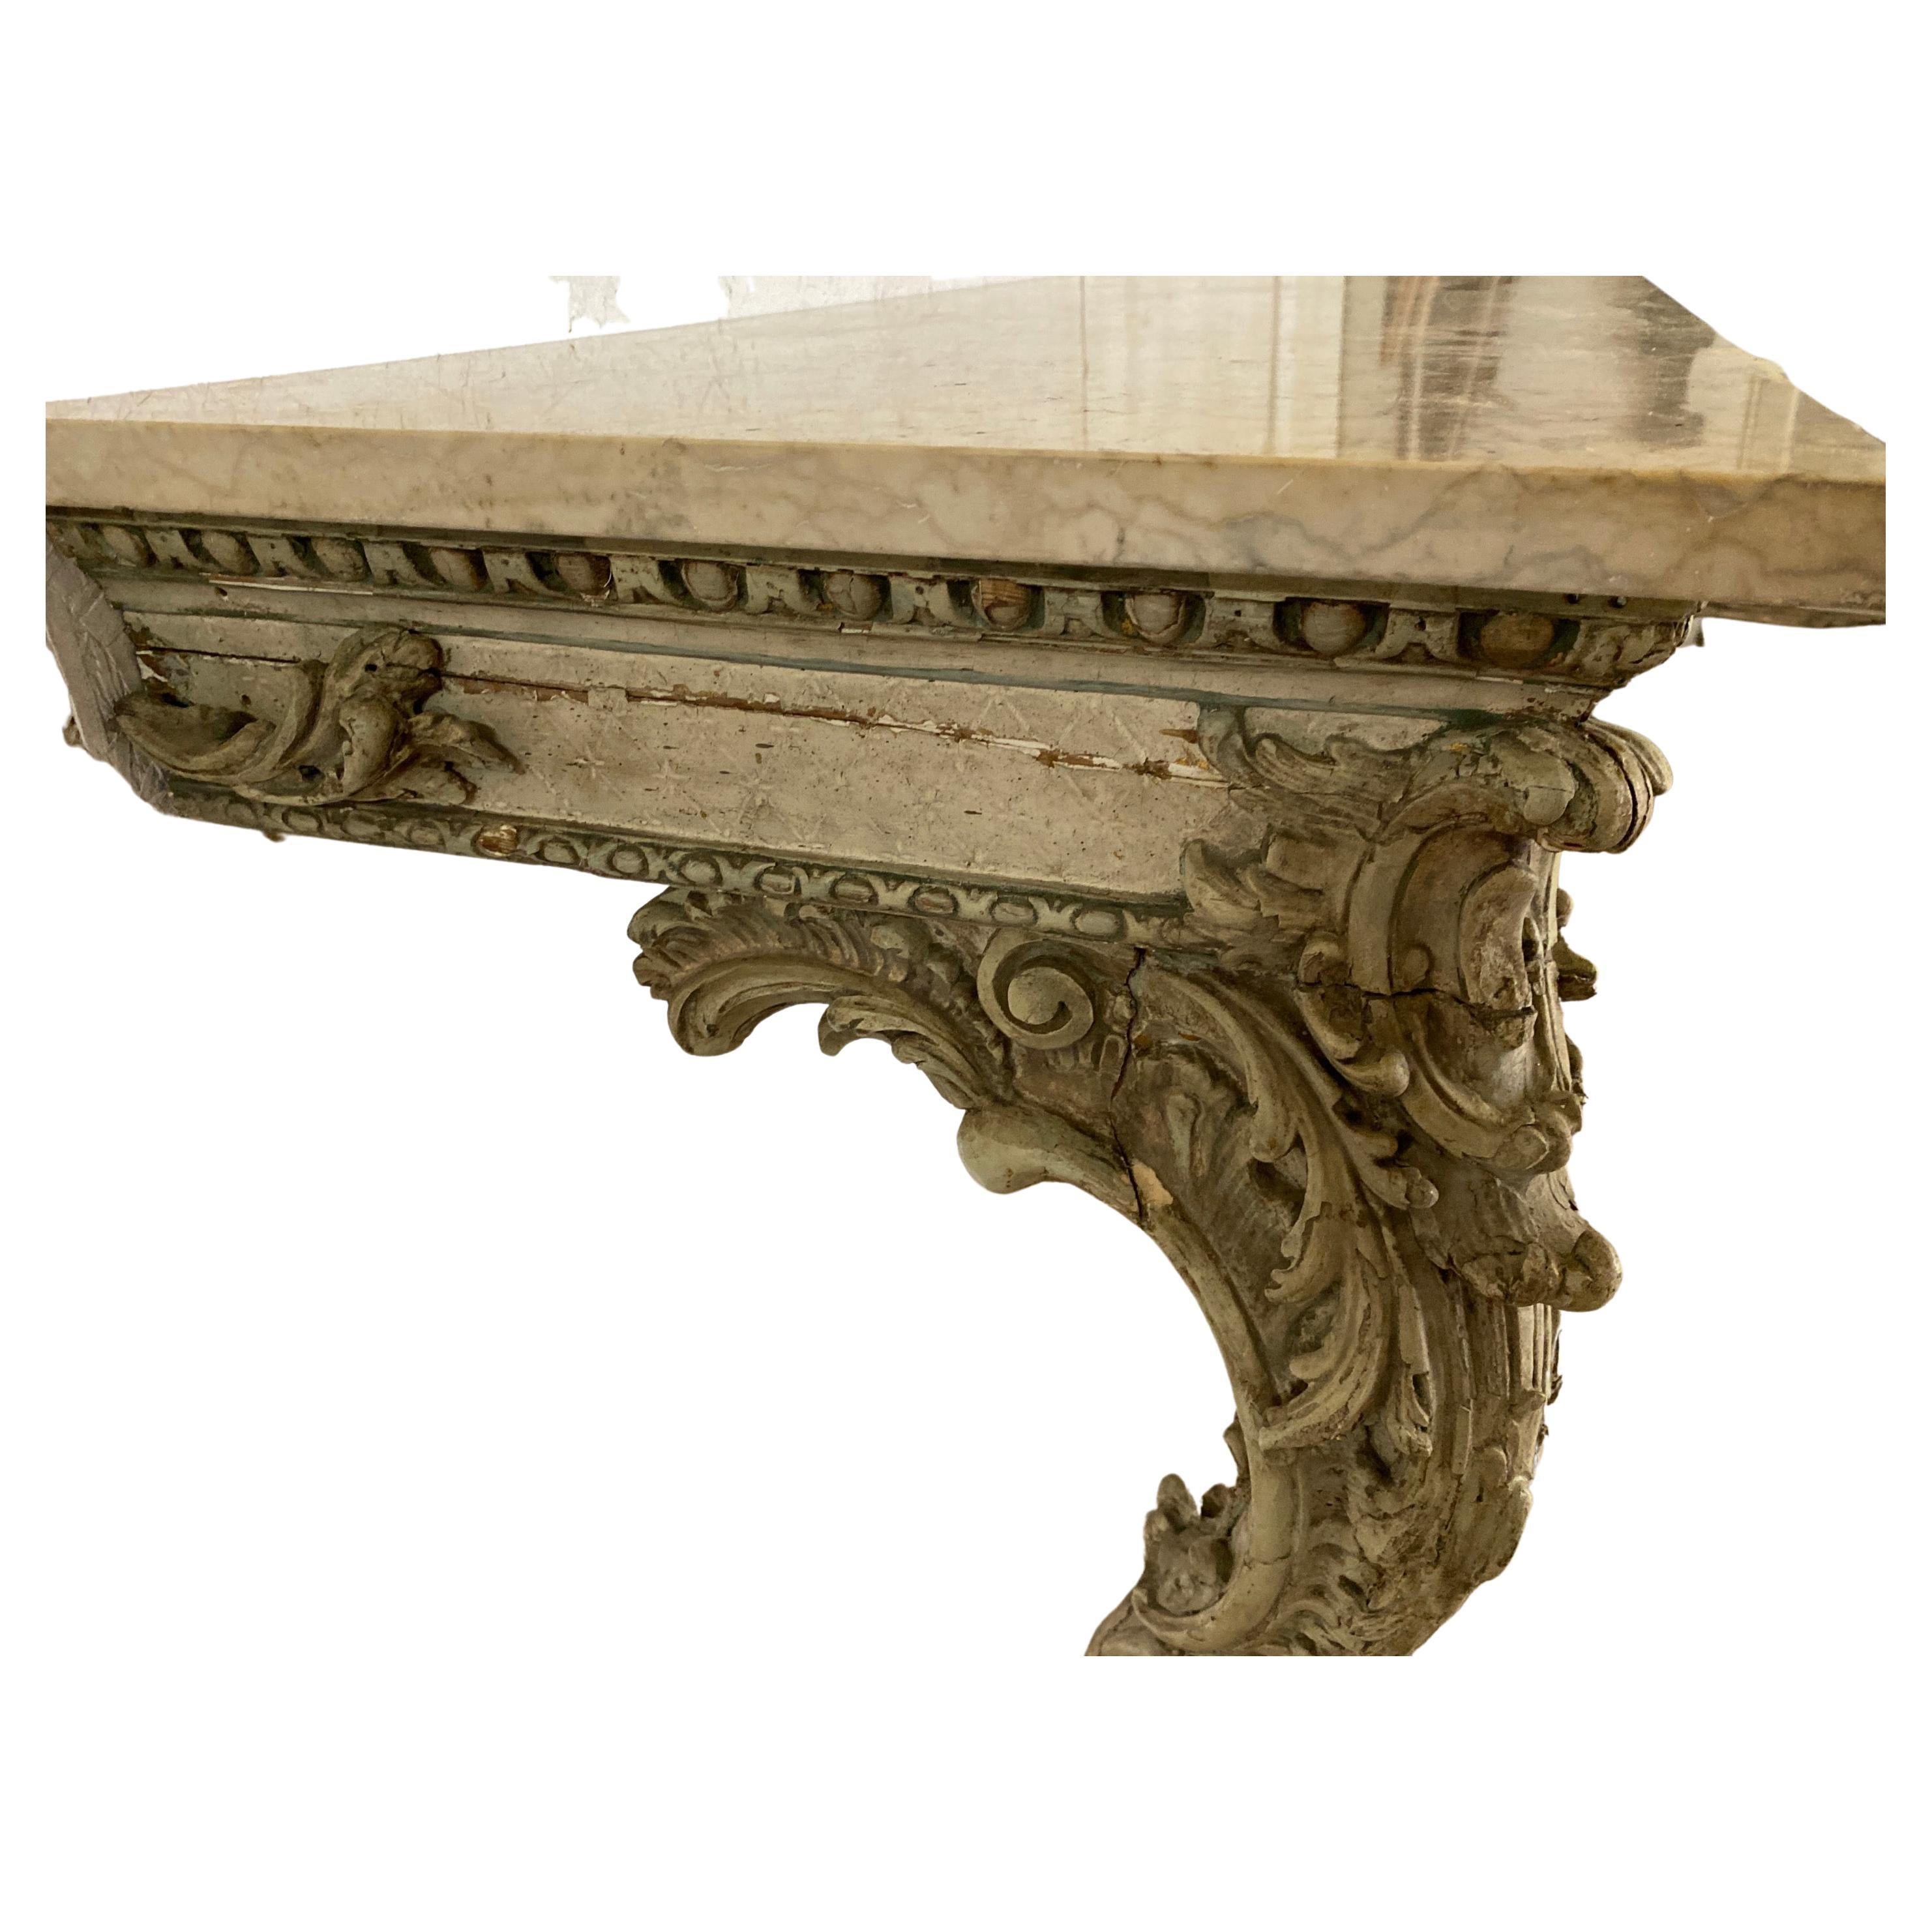 A stunning and extremely decorative Italian 18th century Louis XV period patinated gilt wood and marble console. The wall mounted console is raised by two patinated cabriole legs with carved acanthus leaf accented feet, and larger scrolls at the